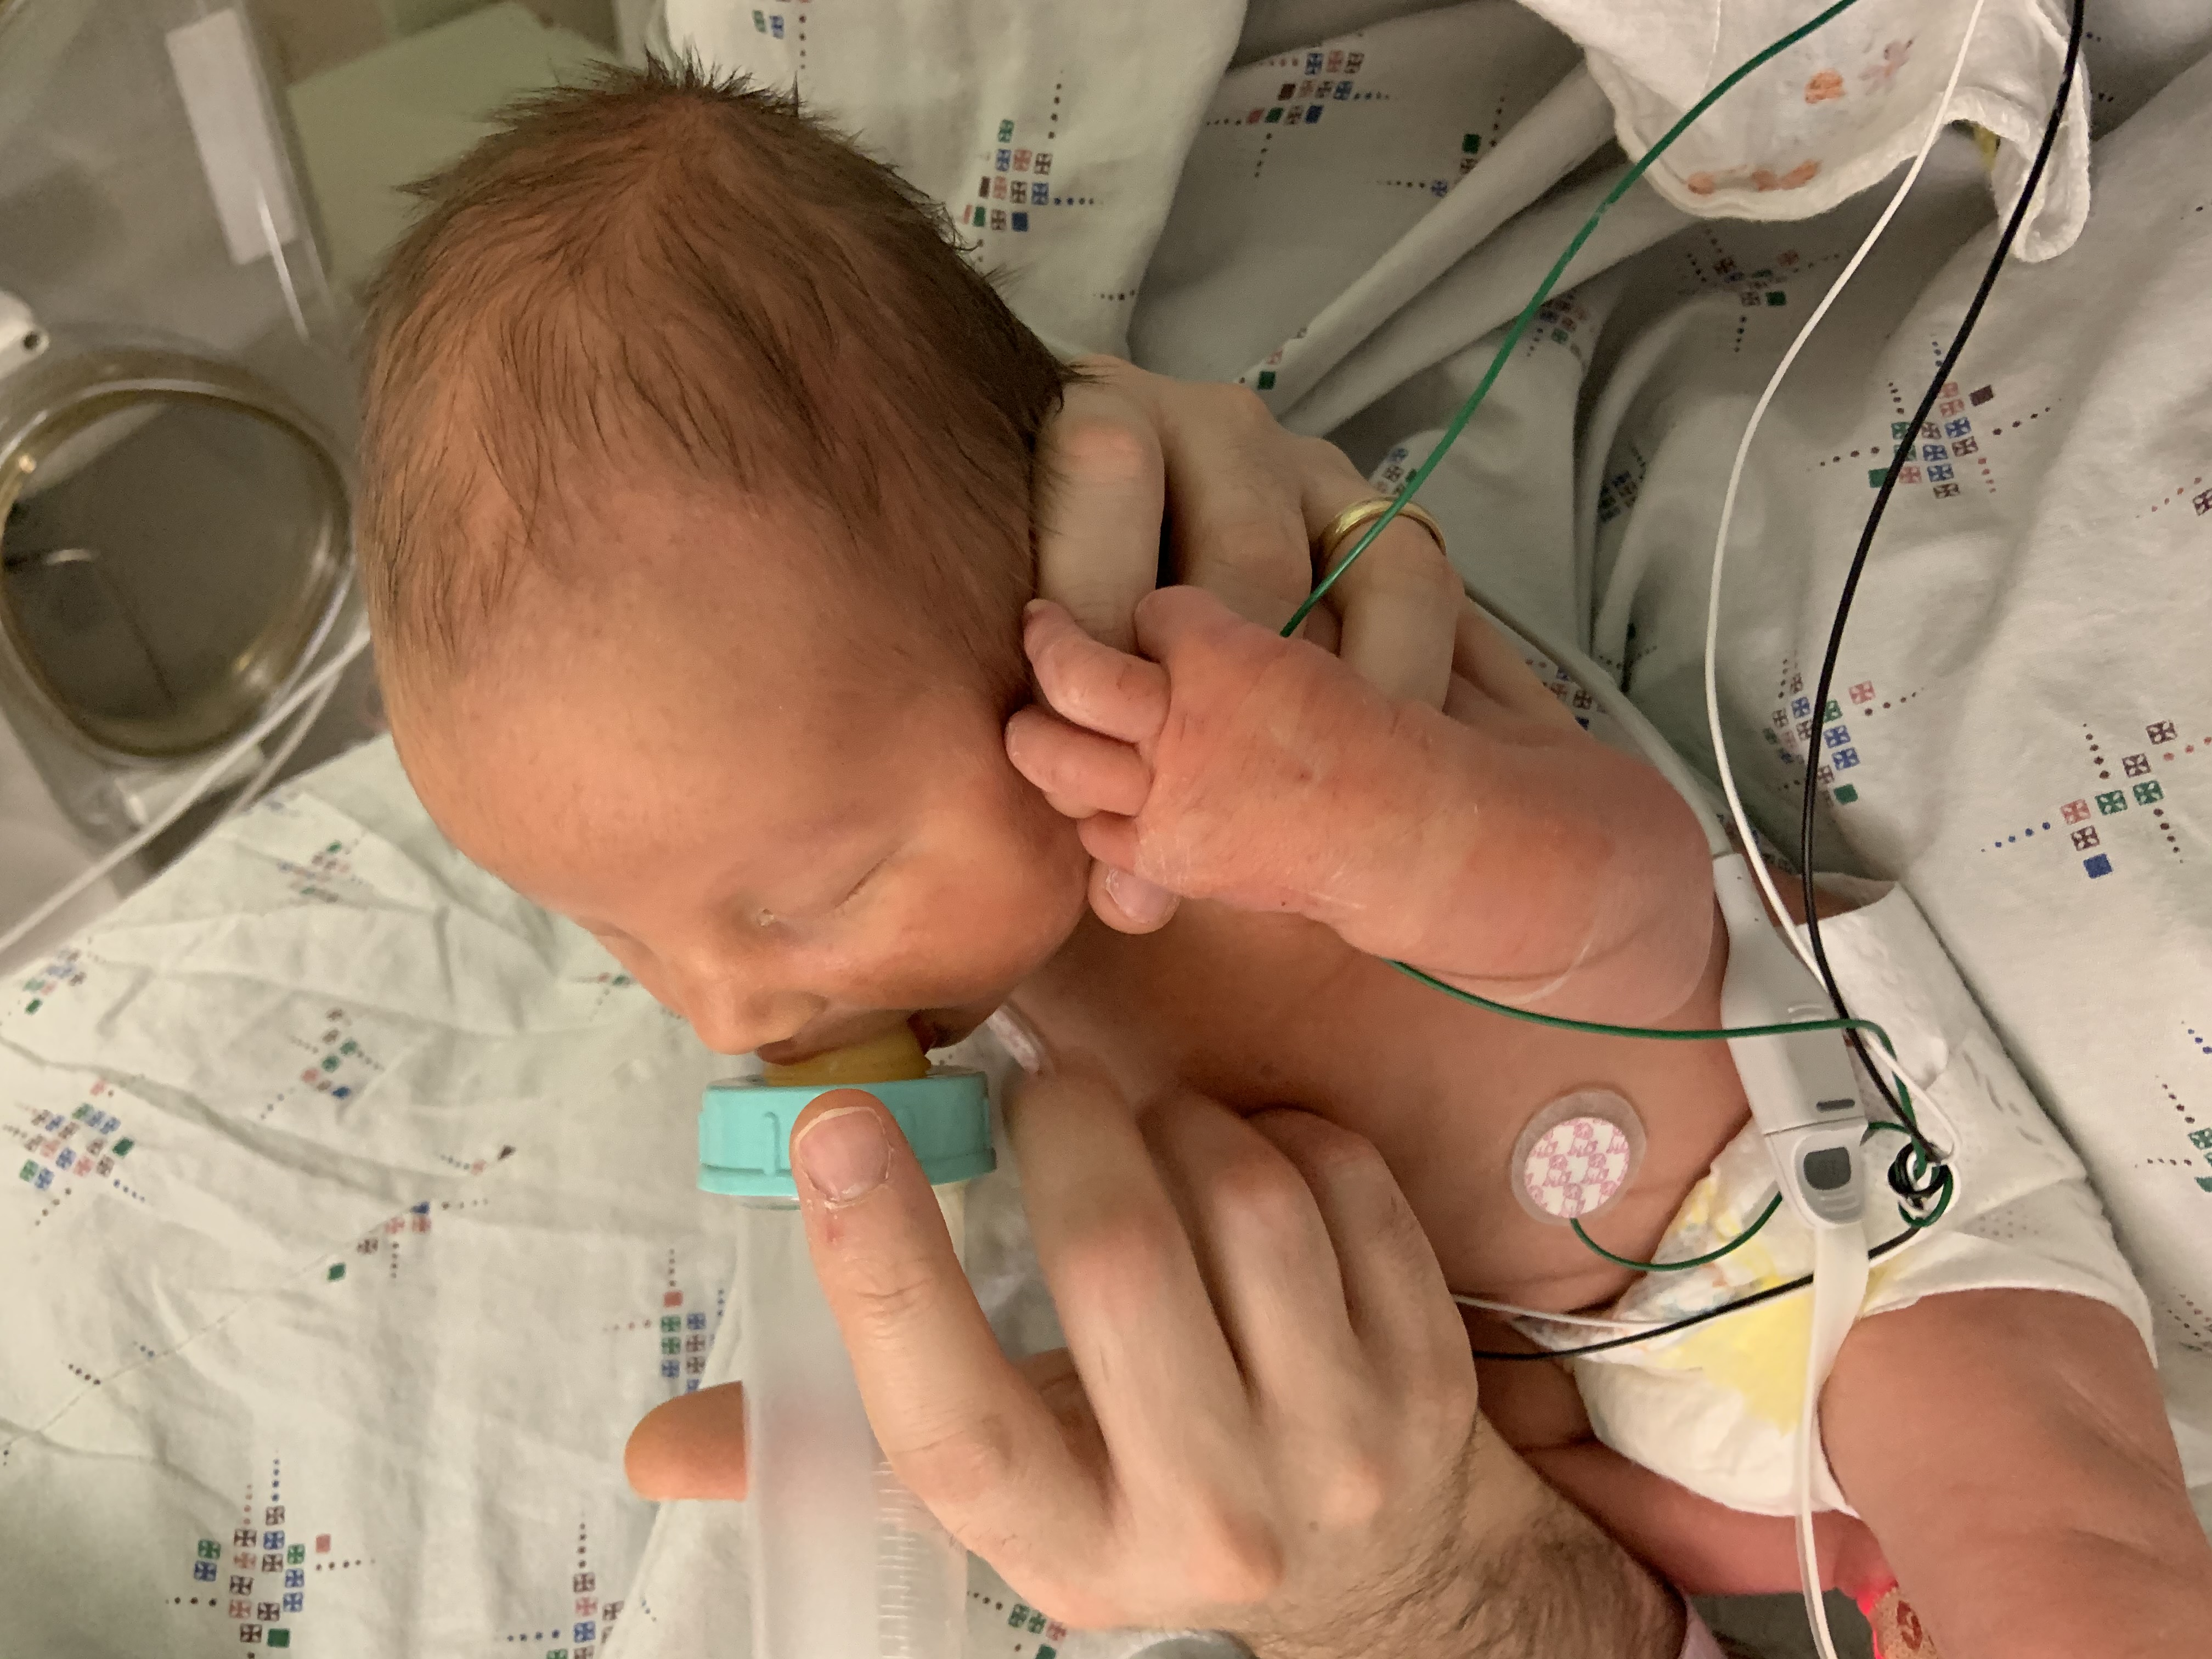 Author's son drinks donor breast milk out of a bottle in the NICU